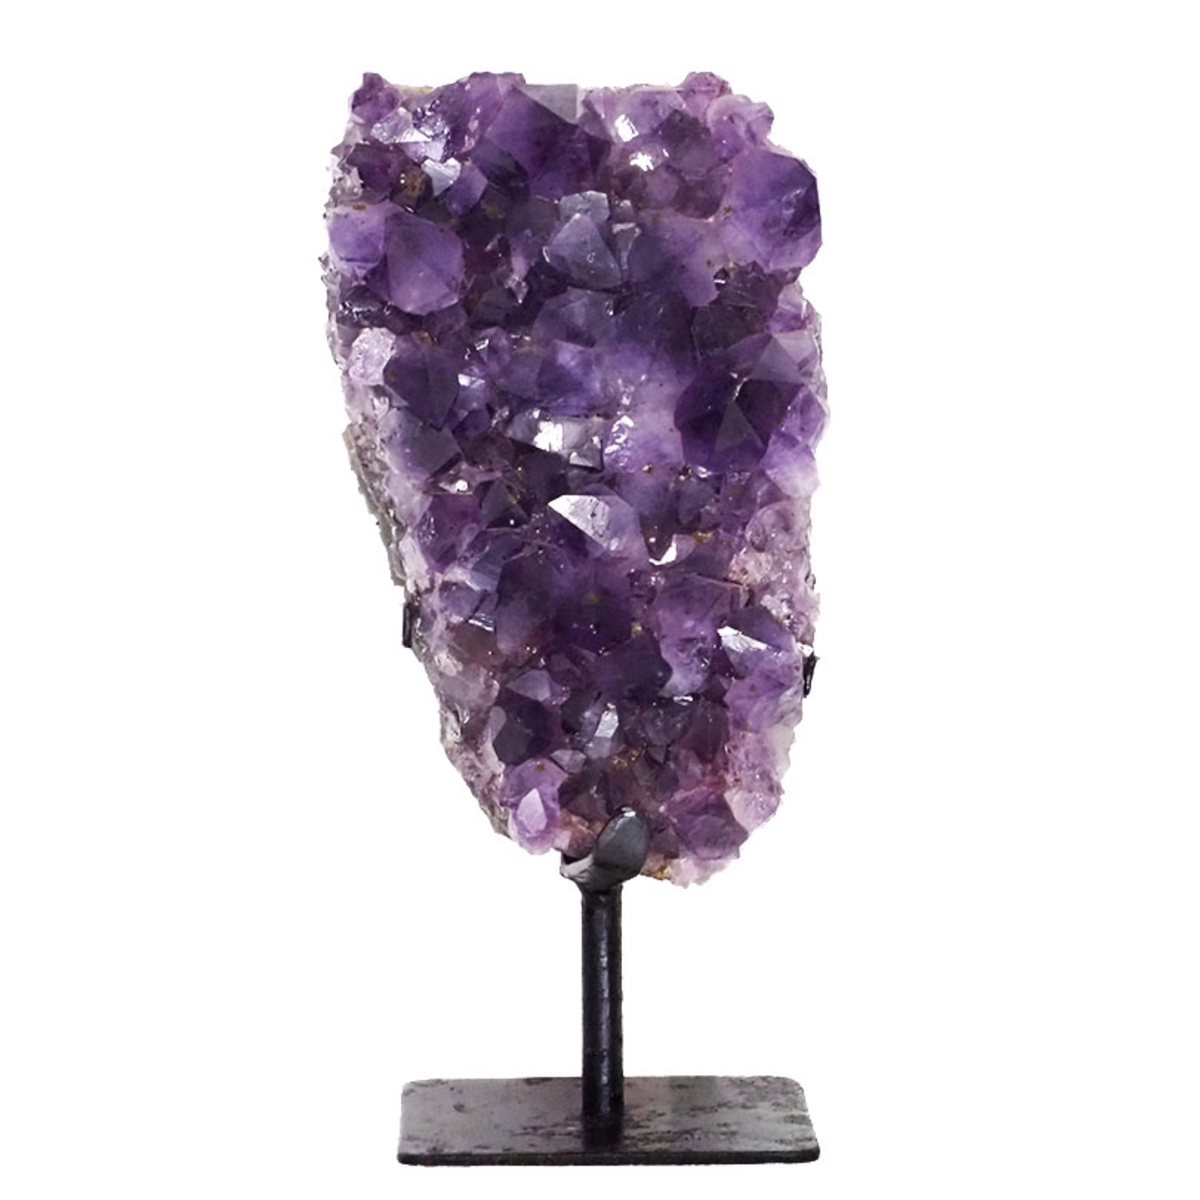 NATURAL AMETHYST GEODE SCULPTURE ON IRON STAND